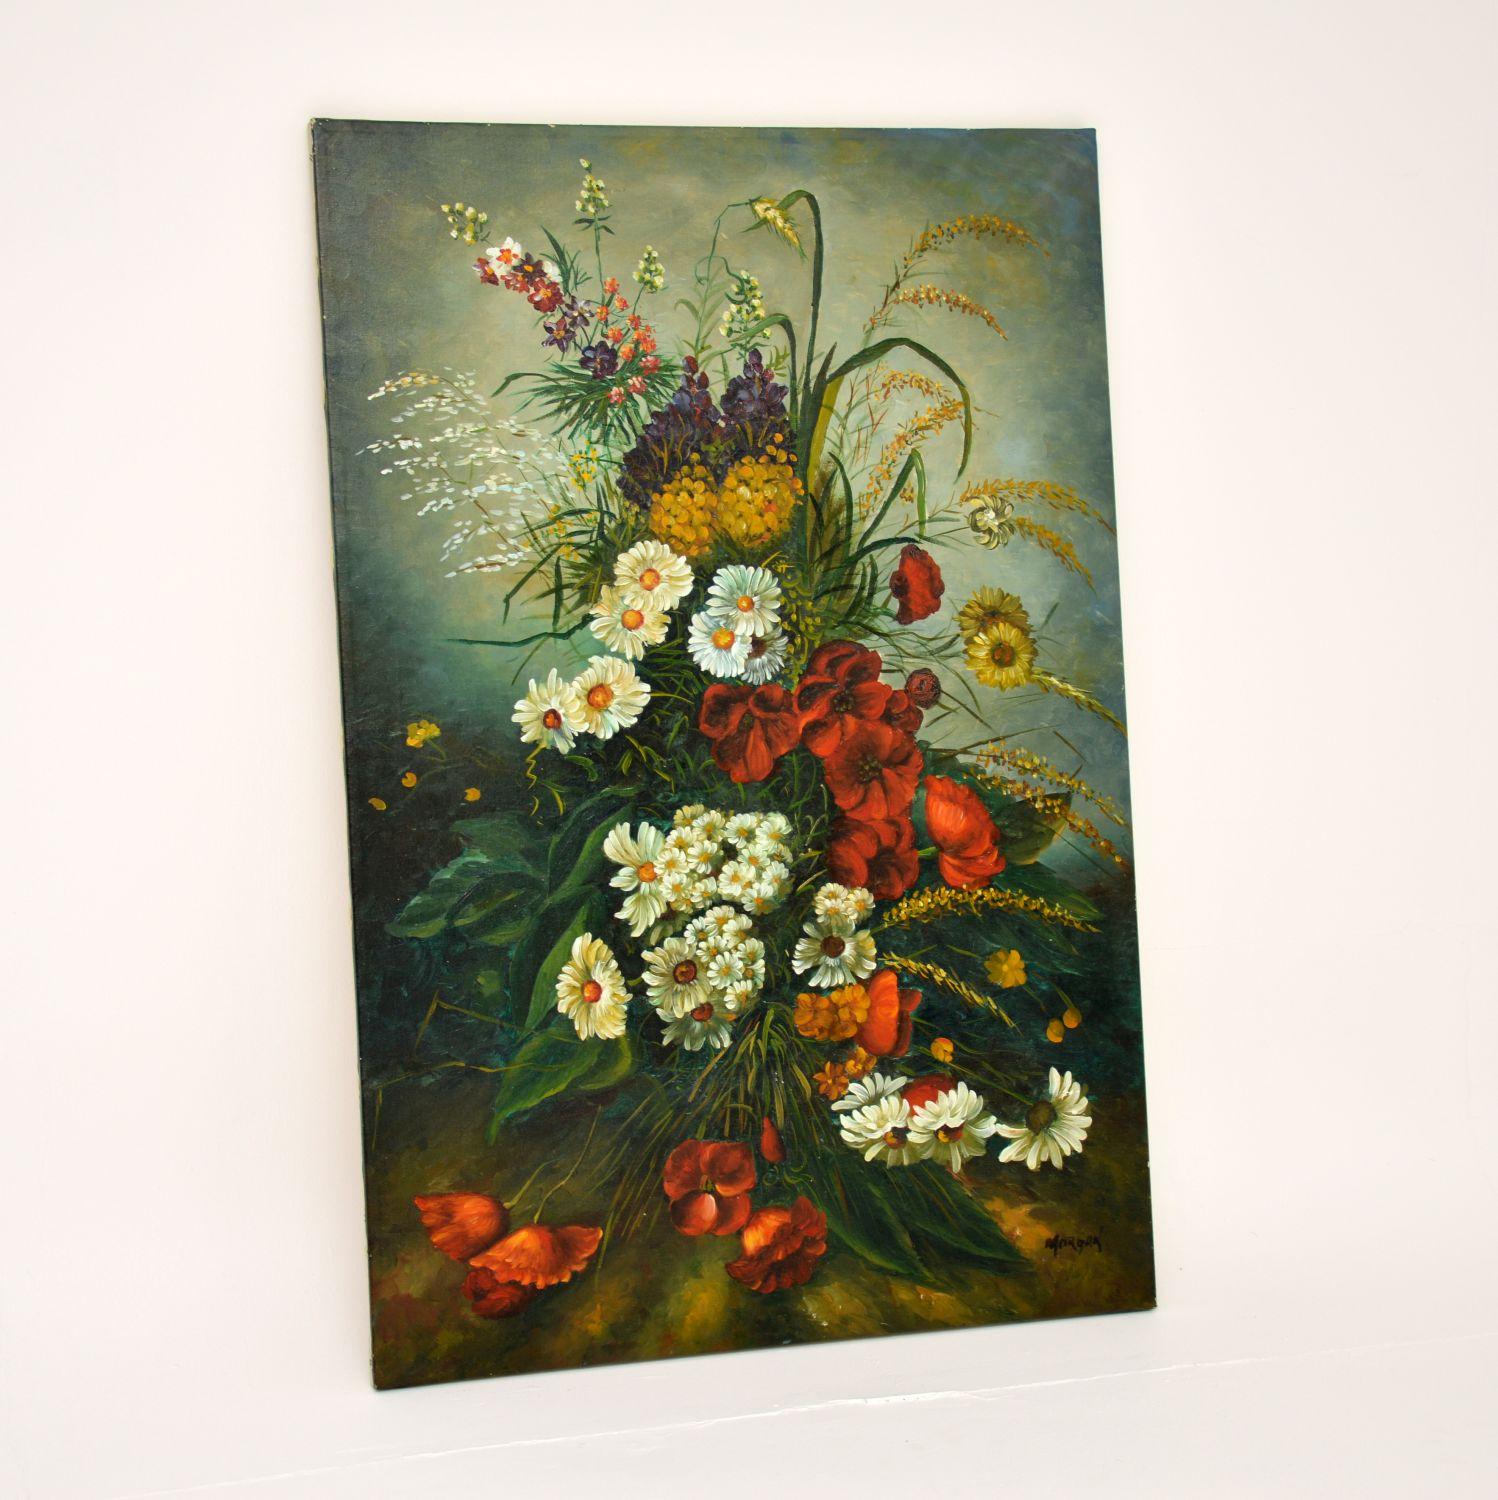 A gorgeous vintage original still life oil painting on canvass, signed by the artist “Morgan’. This dates from around the 1960-1970’s.

It is beautifully executed with great skill, and depicts a still life floral scene. The colours and techniques